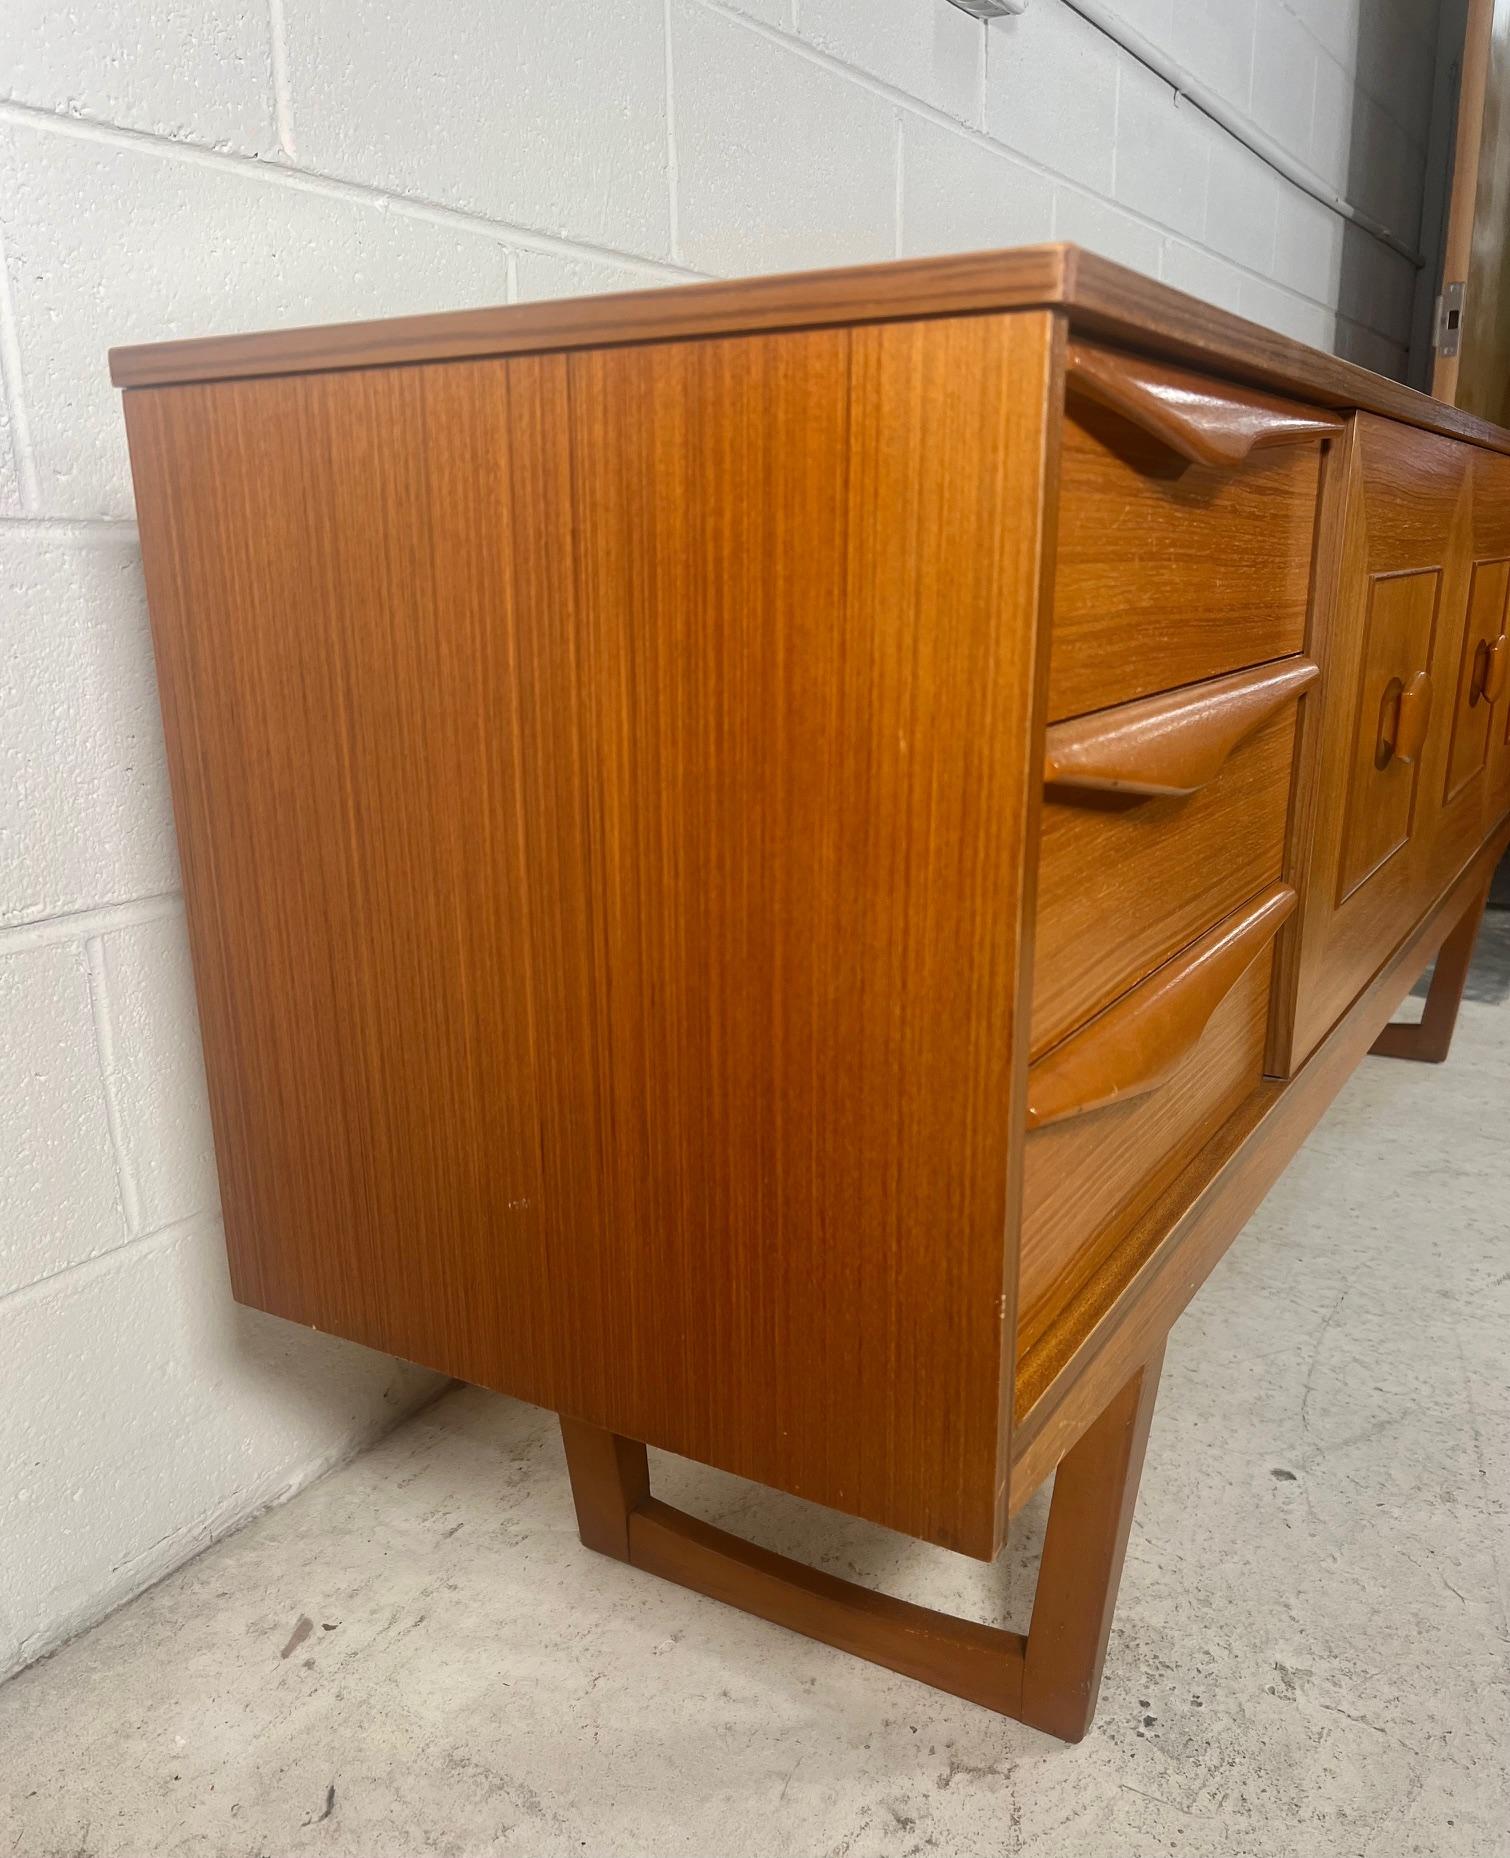 Midcentury Modern Teak Credenza by Stonehill Model Stateroom In Good Condition For Sale In Atlanta, GA